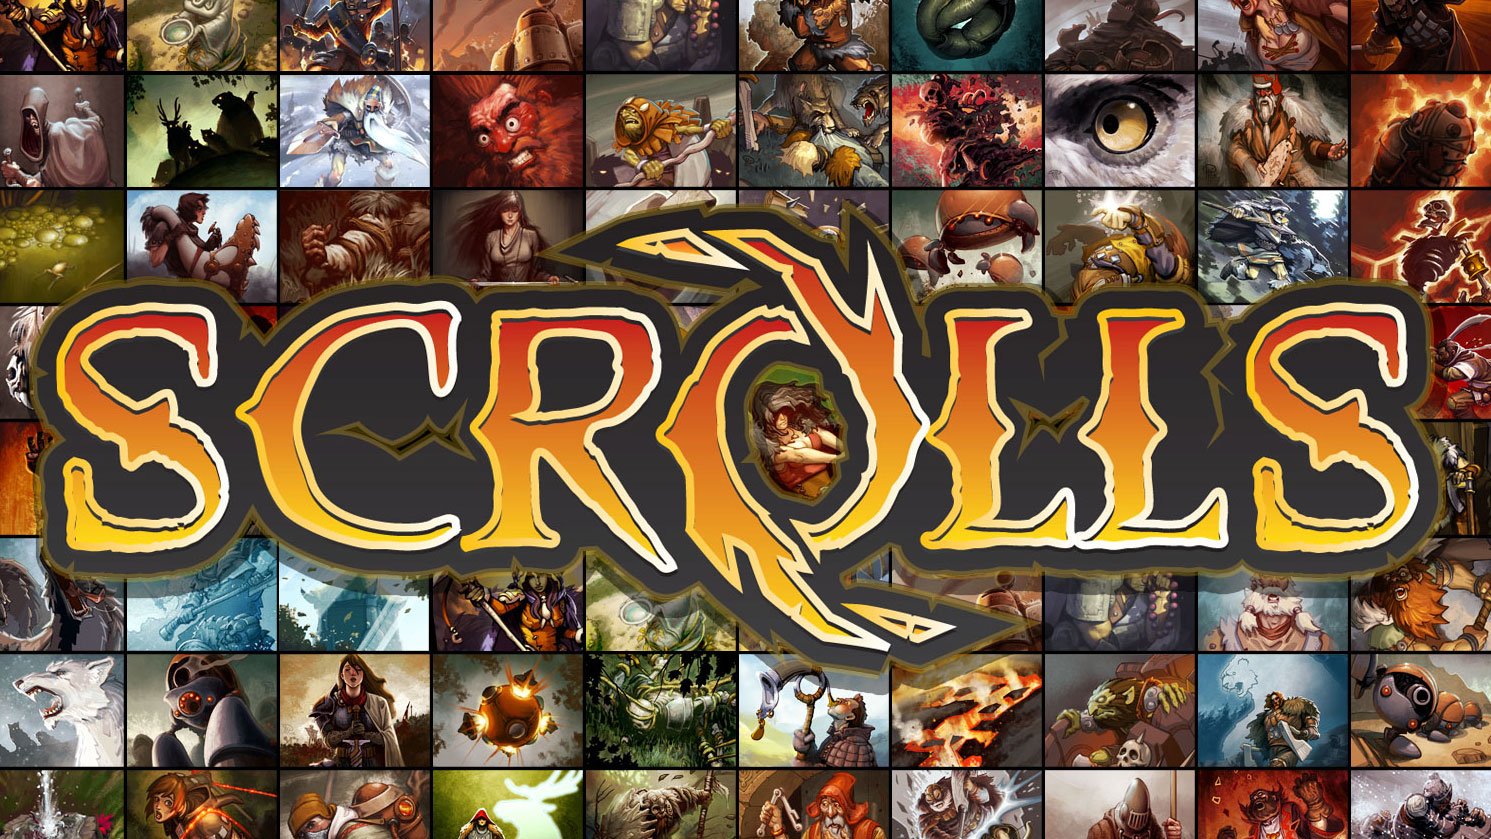 Scrolls for Tablets Coming ‘Late Fall’